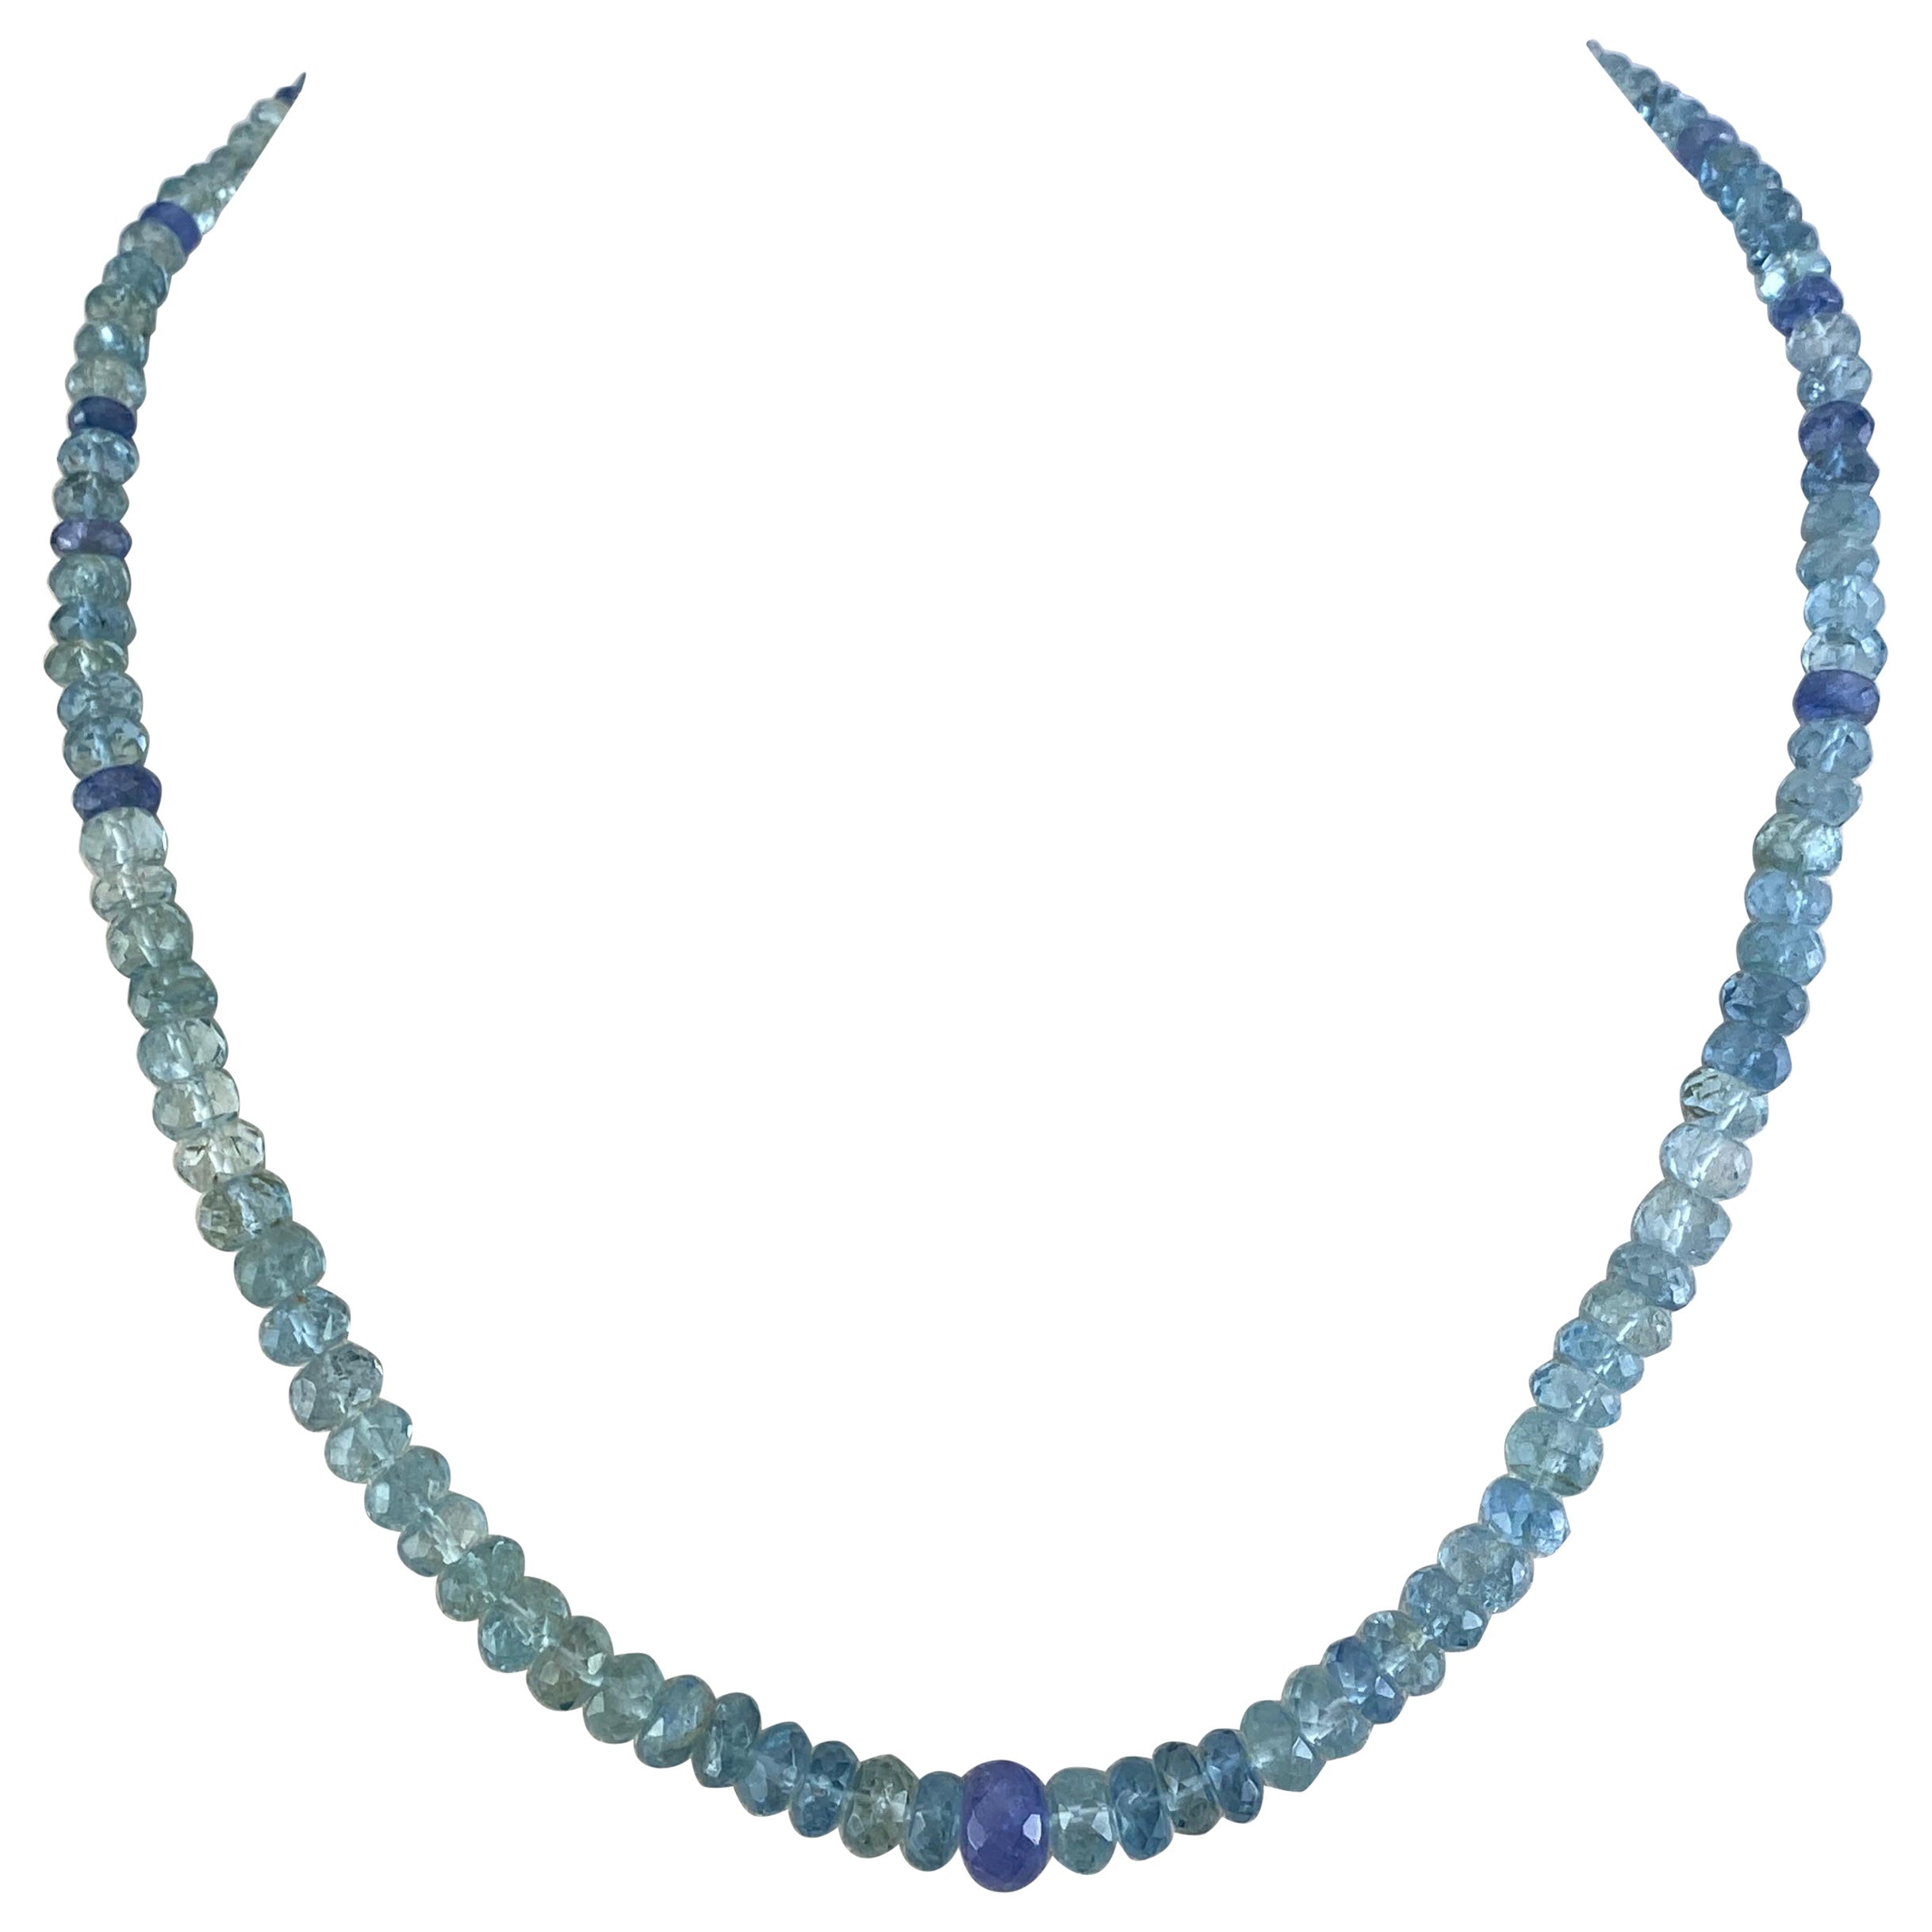 Aquamarine and Tanzanite Beads Necklace For Sale